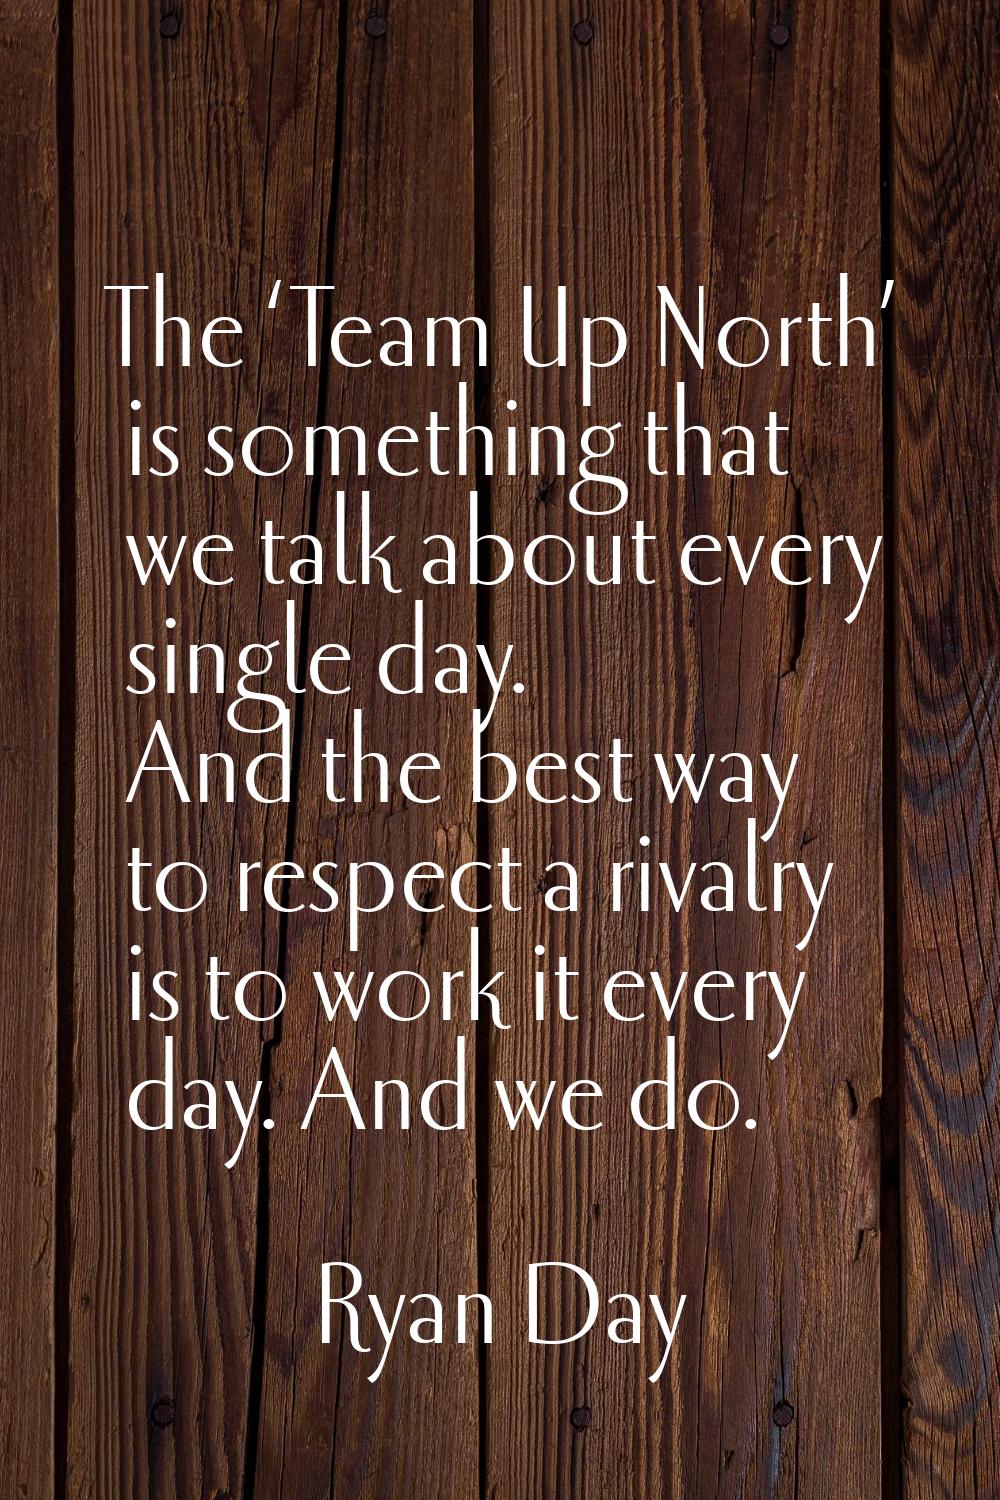 The ‘Team Up North’ is something that we talk about every single day. And the best way to respect a